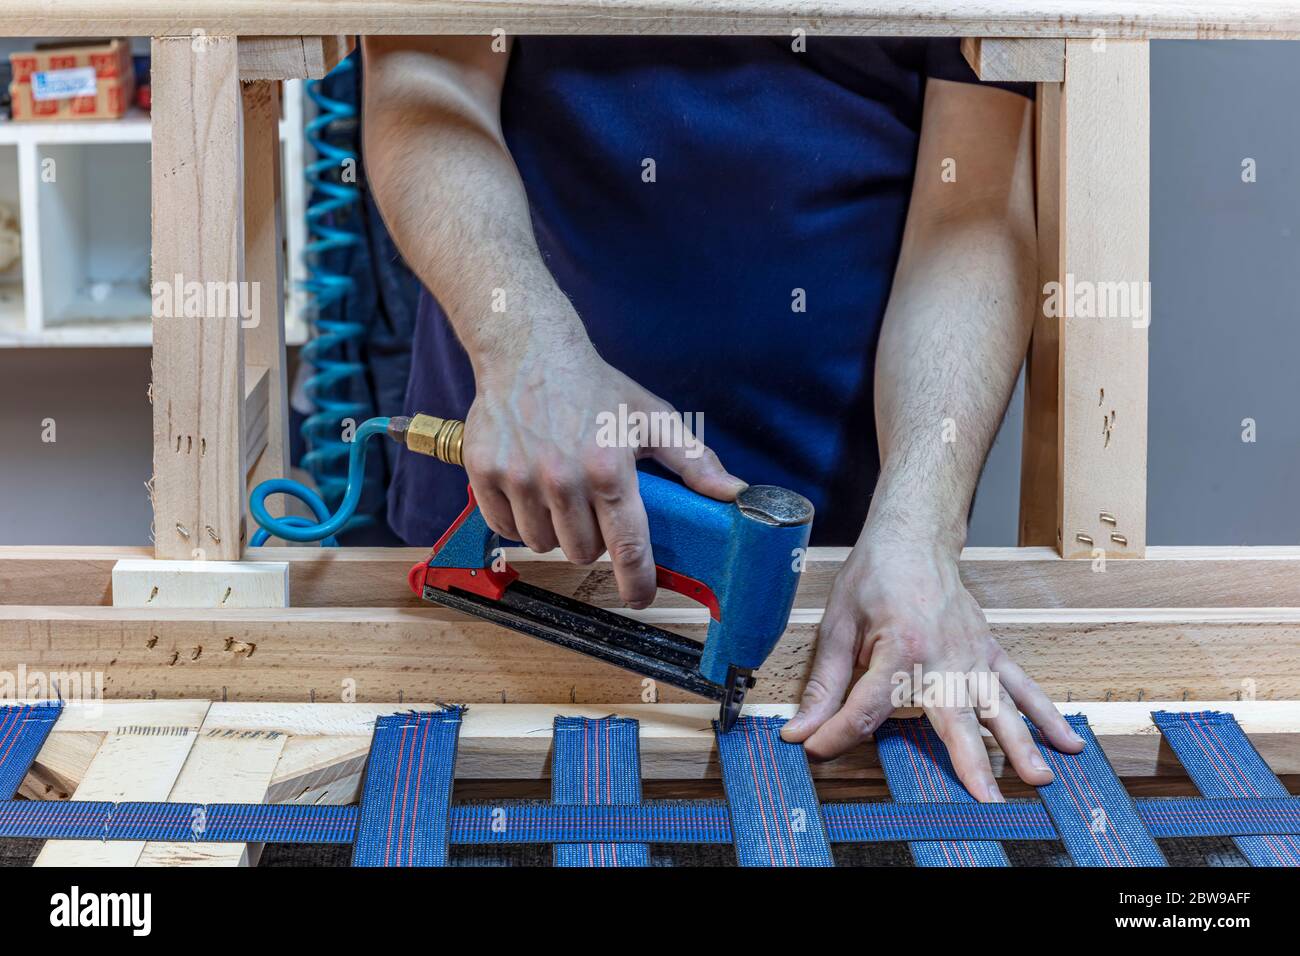 Manufacture of Furniture Seats. Professional male carpenter upholstering vintage armchair in repair shop. Stock Photo